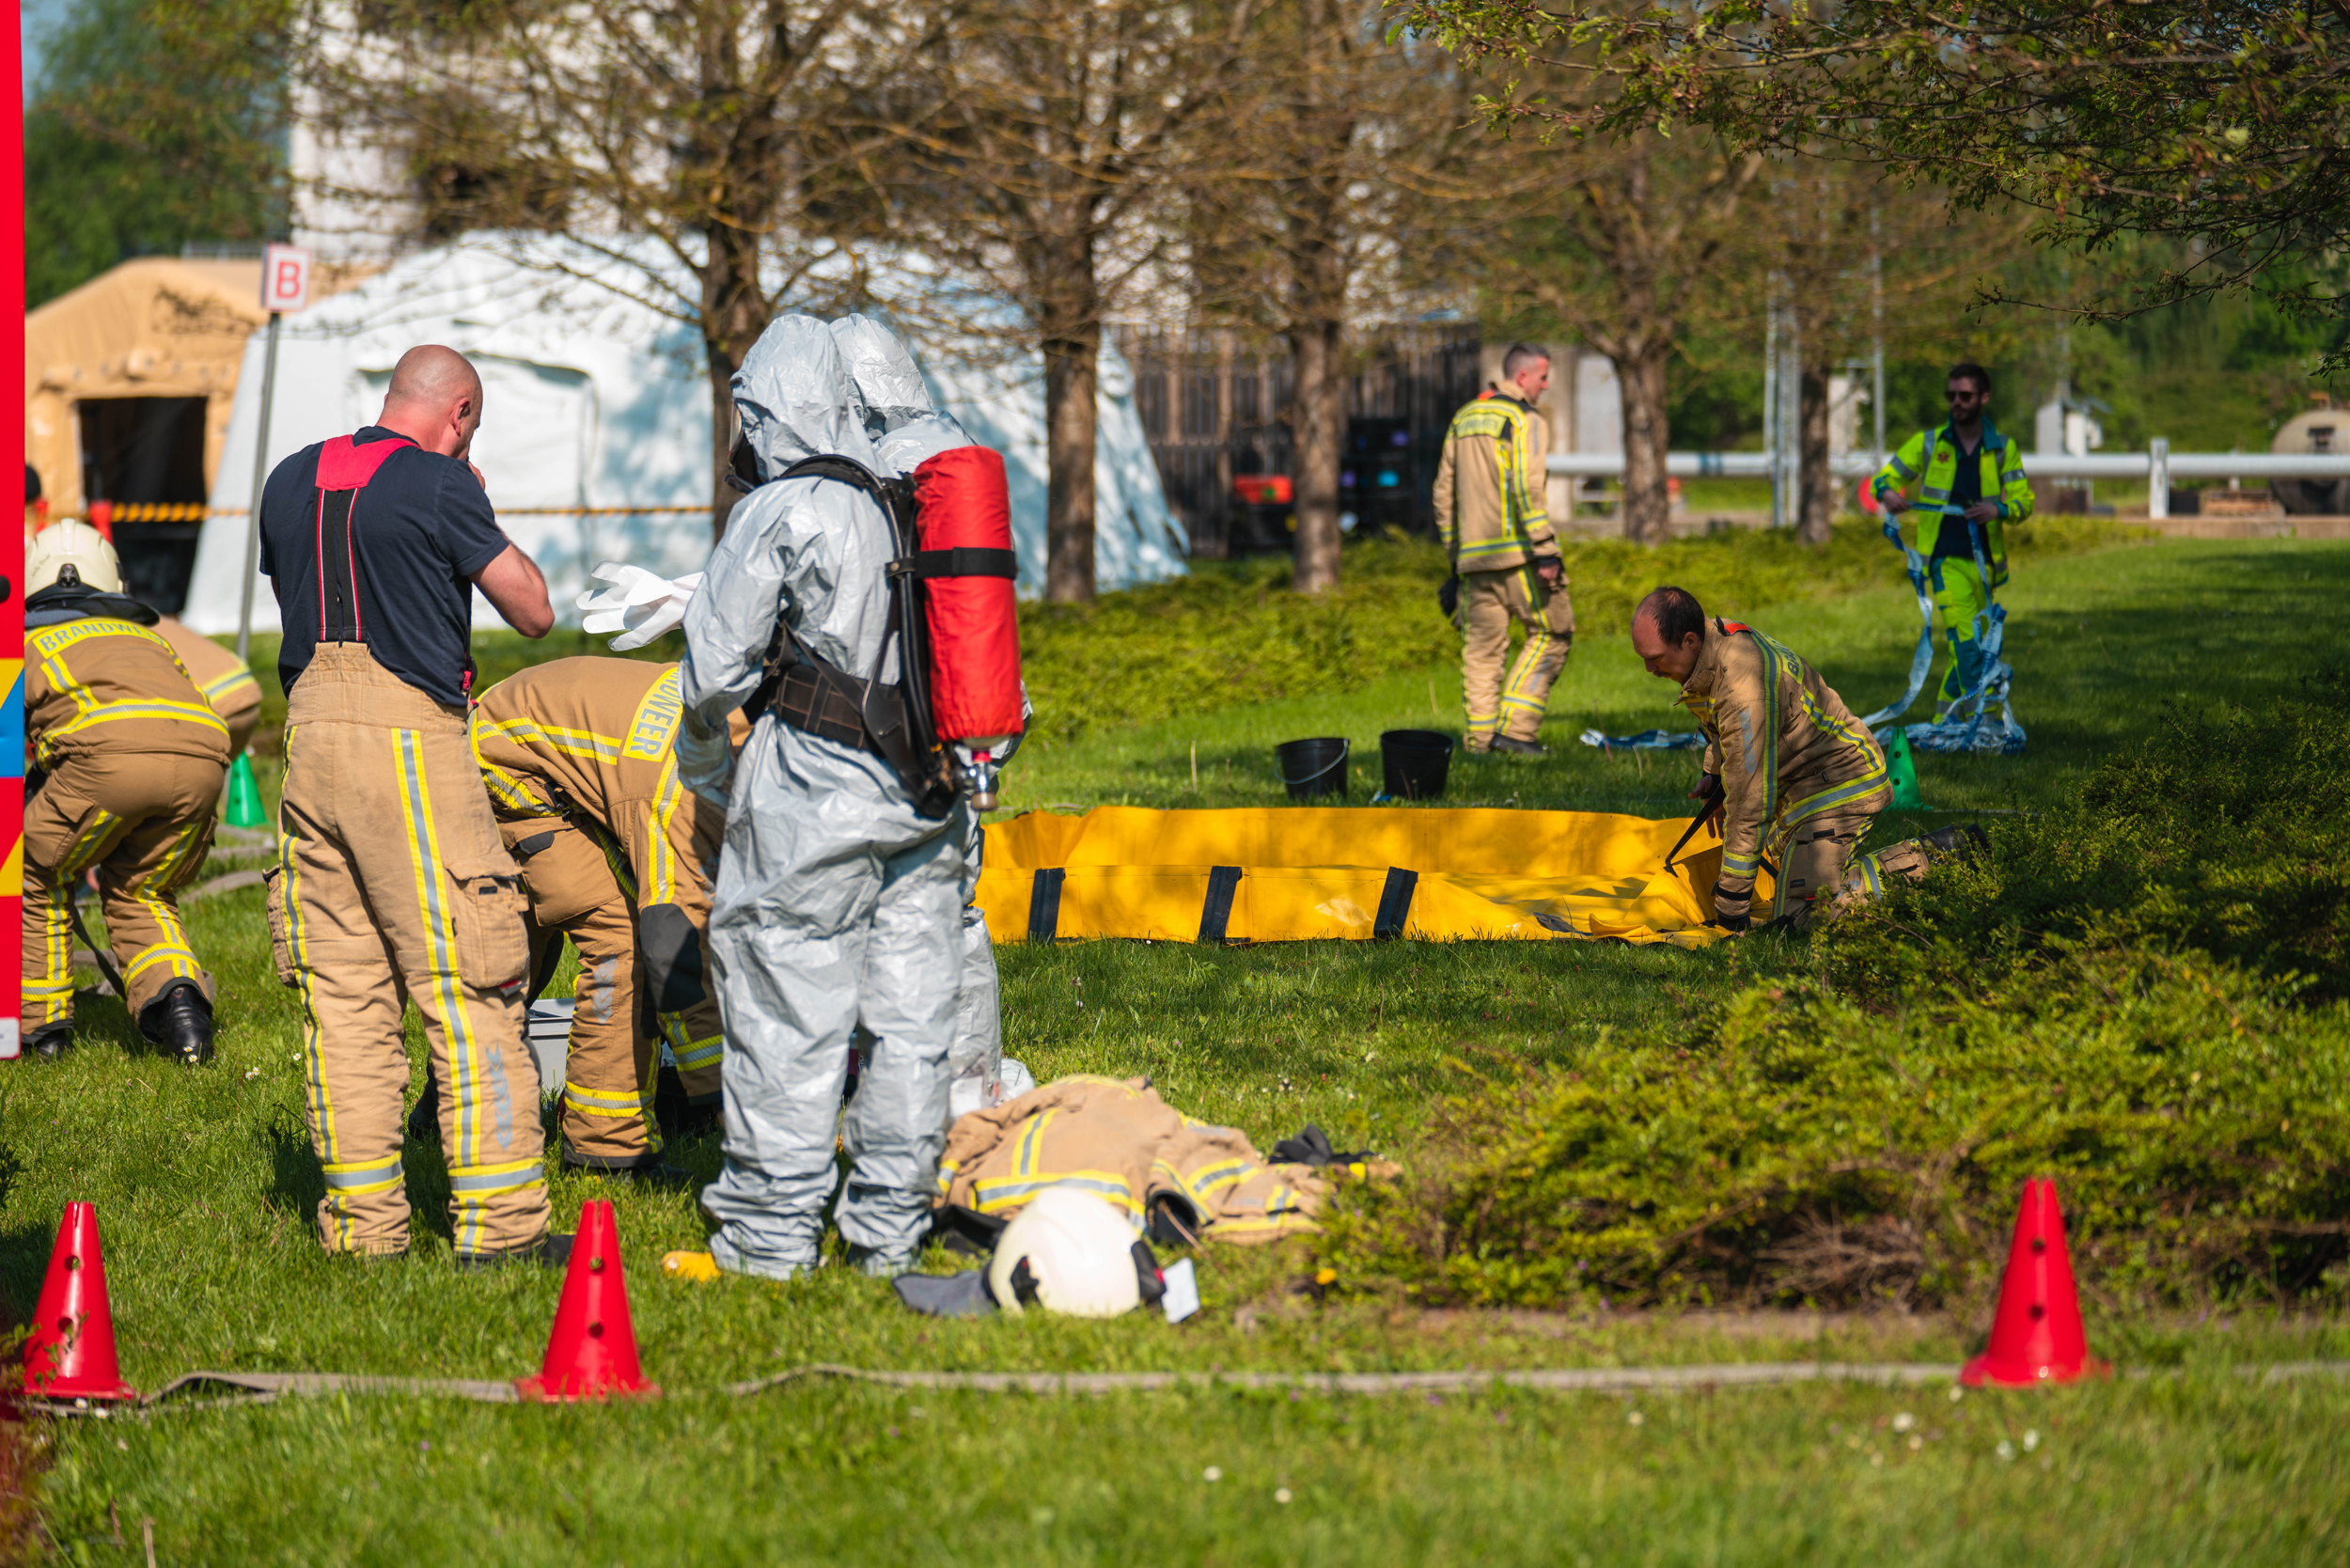 Around nine people in the photo. Six people in light brown uniforms with yellow stripes. Two people in grey hazmat suits. One man in the green waistcoat is holding something.